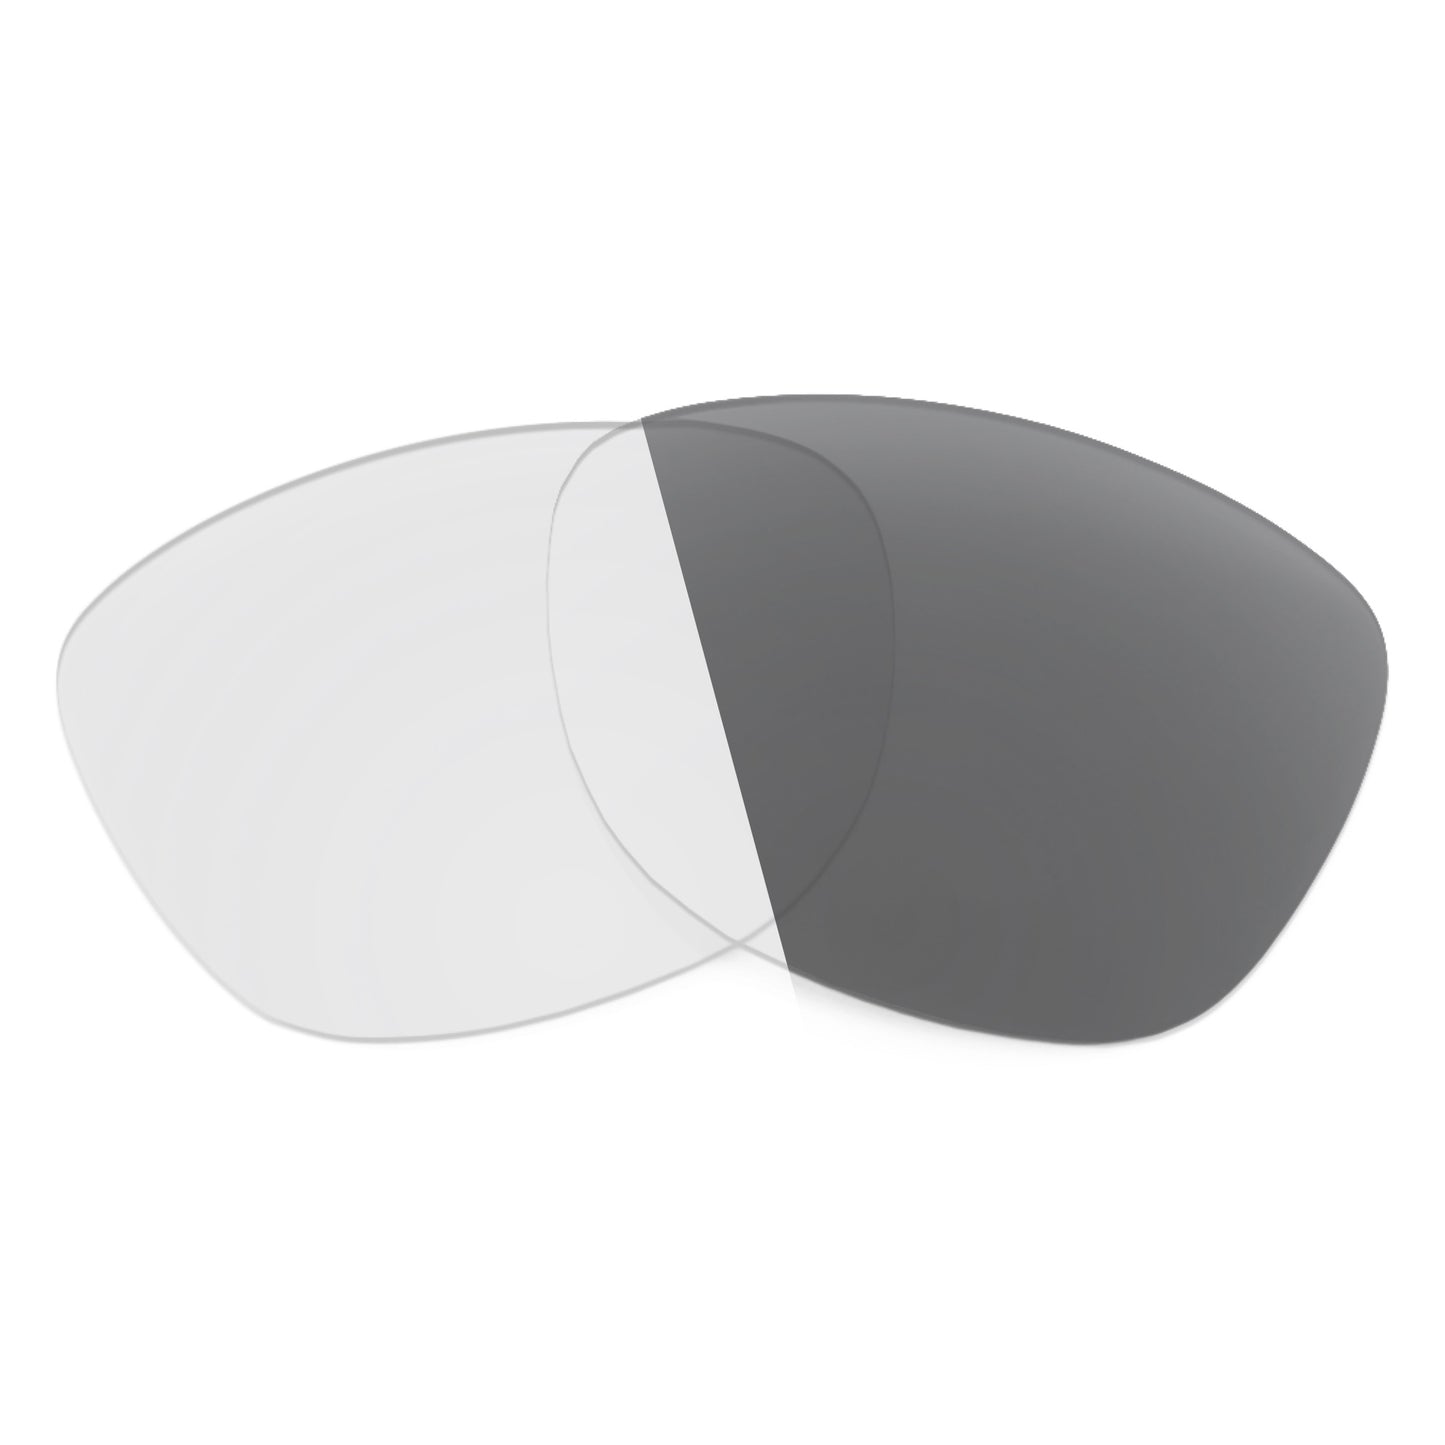 Revant replacement lenses for Ray-Ban Mr. Burbank RB2283 58mm Non-Polarized Adapt Gray Photochromic